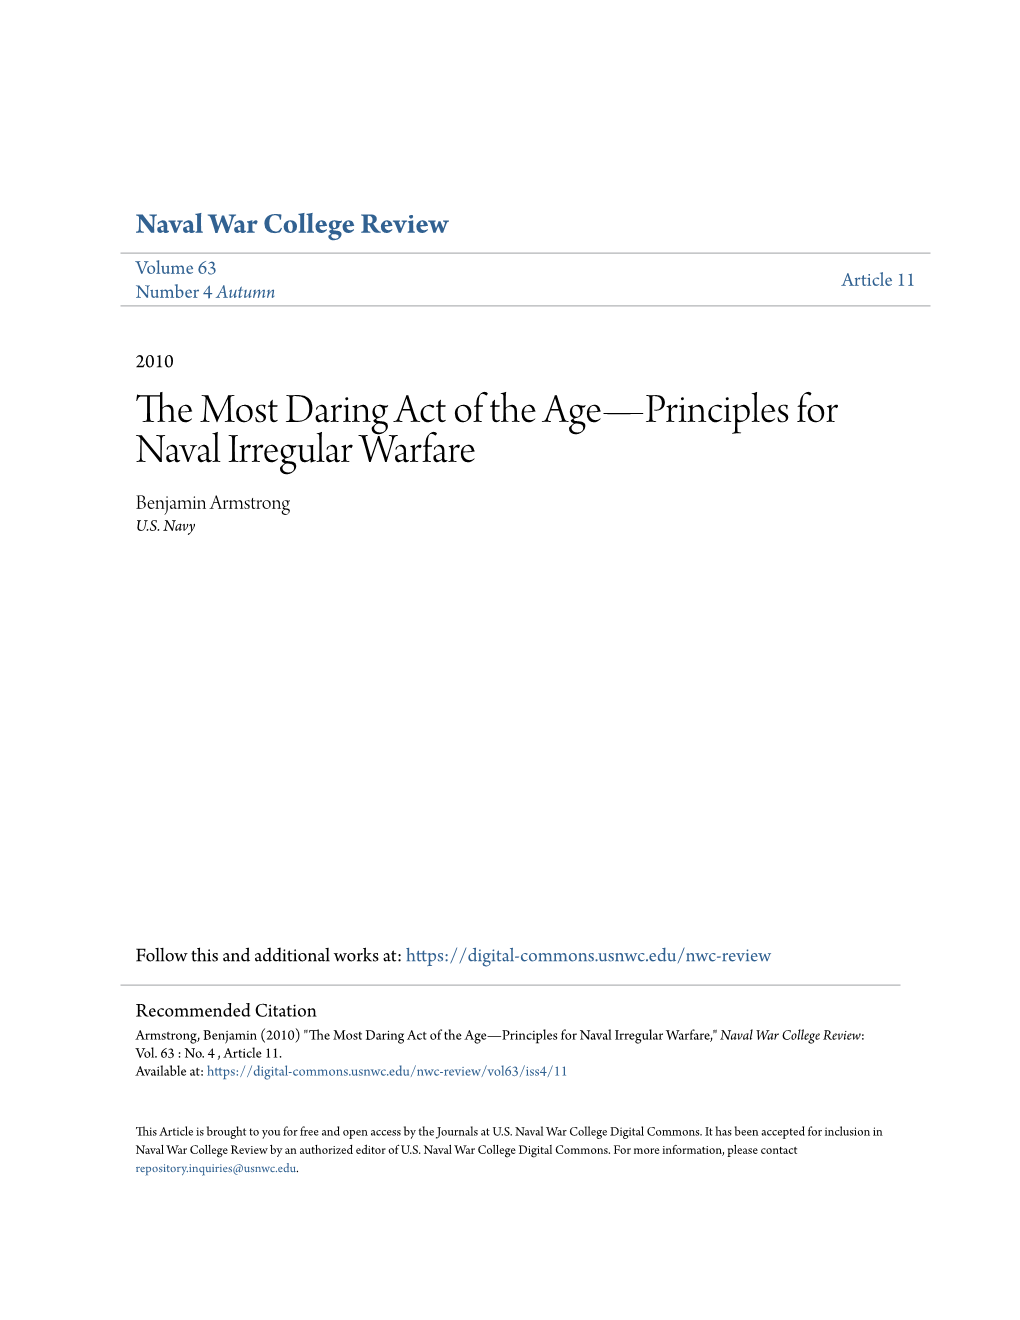 The Most Daring Act of the Age—Principles for Naval Irregular War